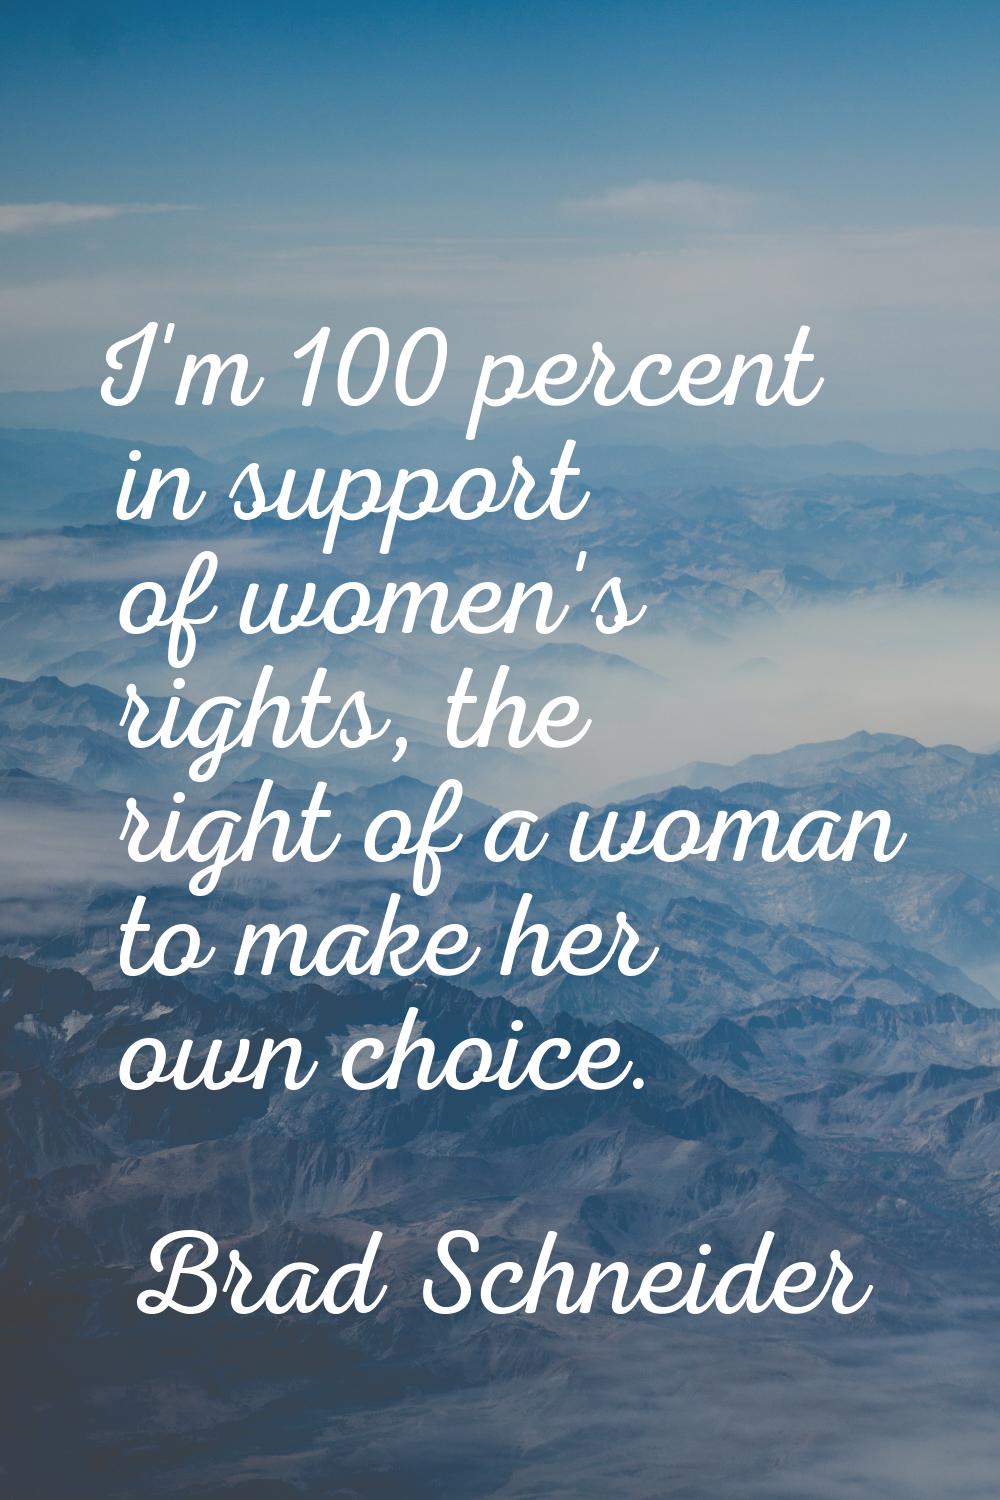 I'm 100 percent in support of women's rights, the right of a woman to make her own choice.